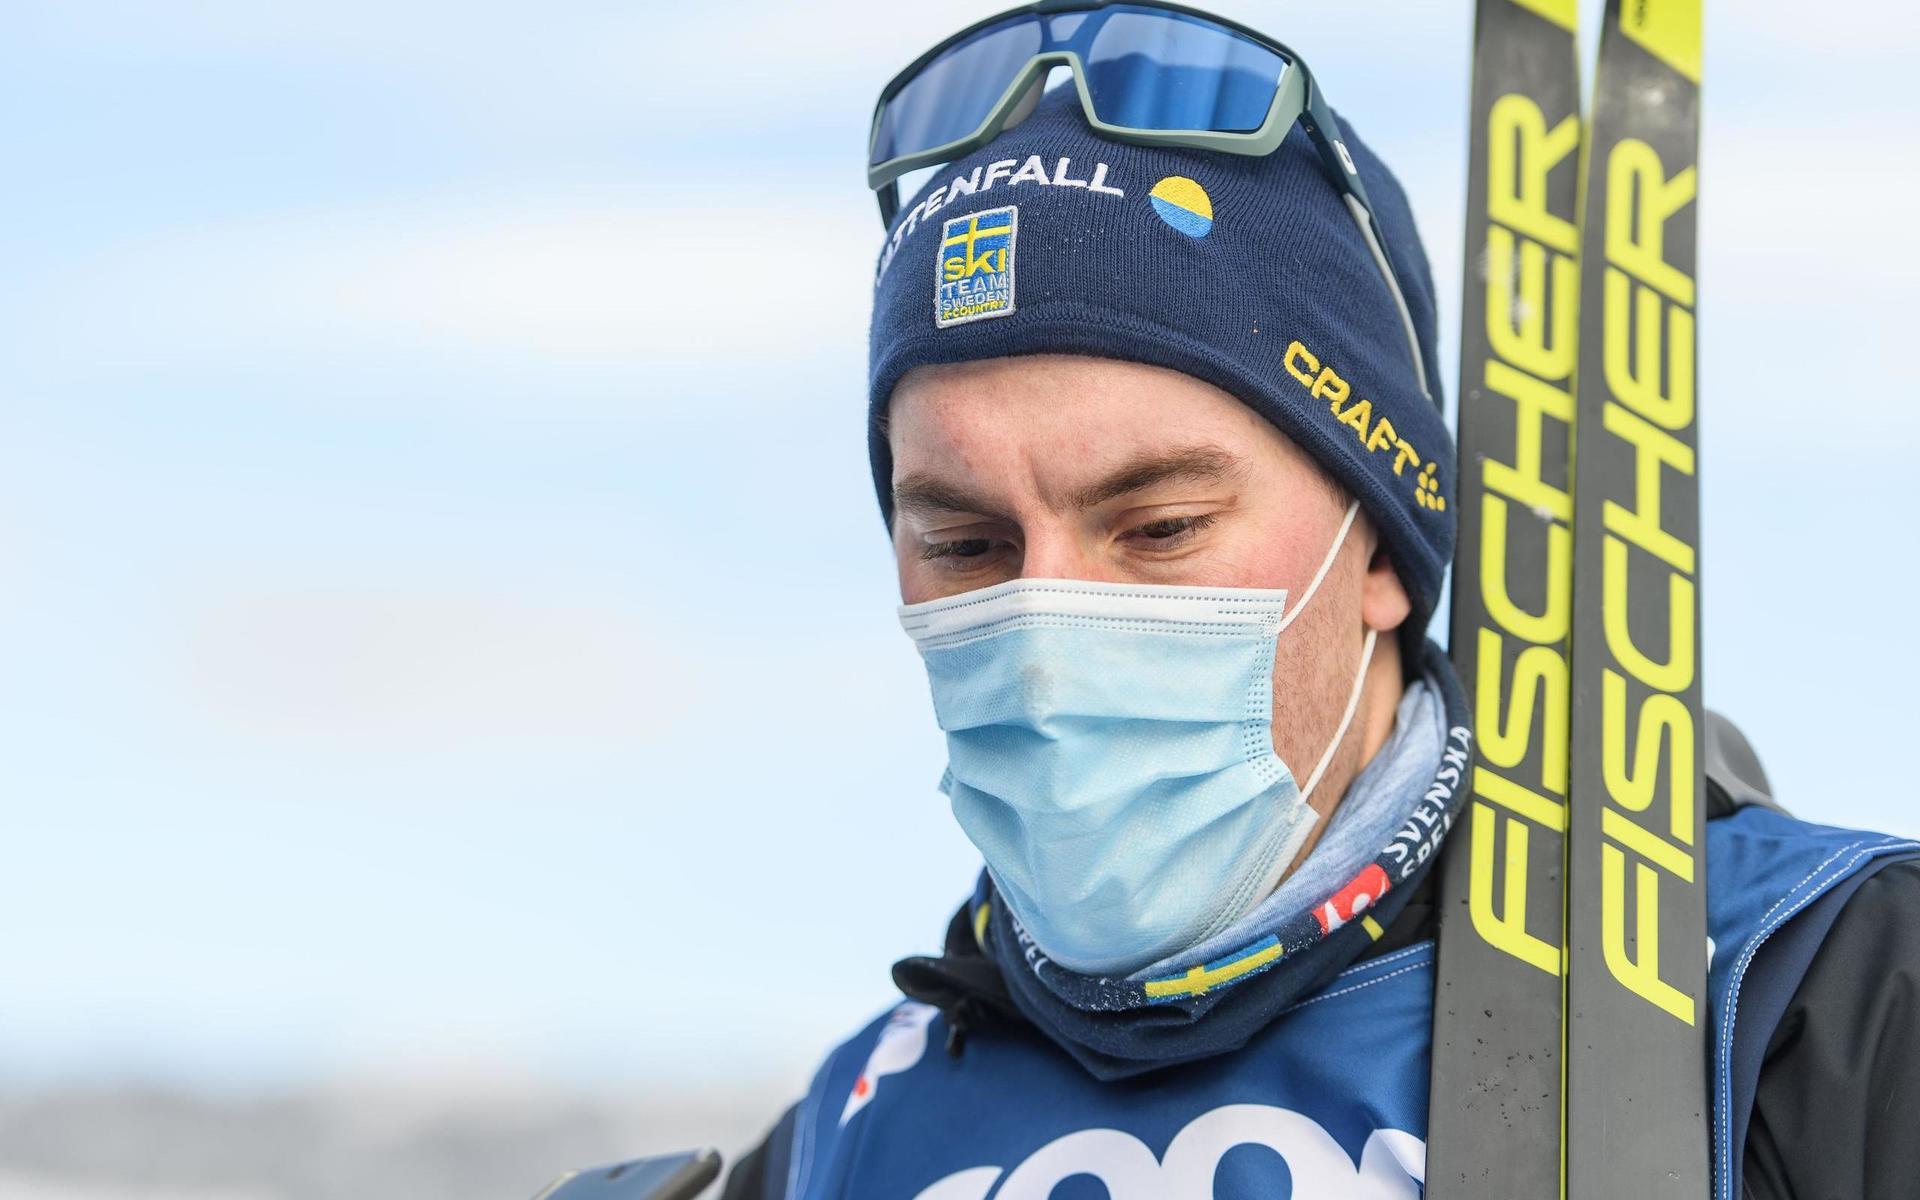 210104 Johan Häggström of Sweden in the mixed zone after a training session during Tour de Ski on January 4, 2021 in Toblach.Photo: Maxim Thoré / BILDBYRÅN / kod MT / MT0101